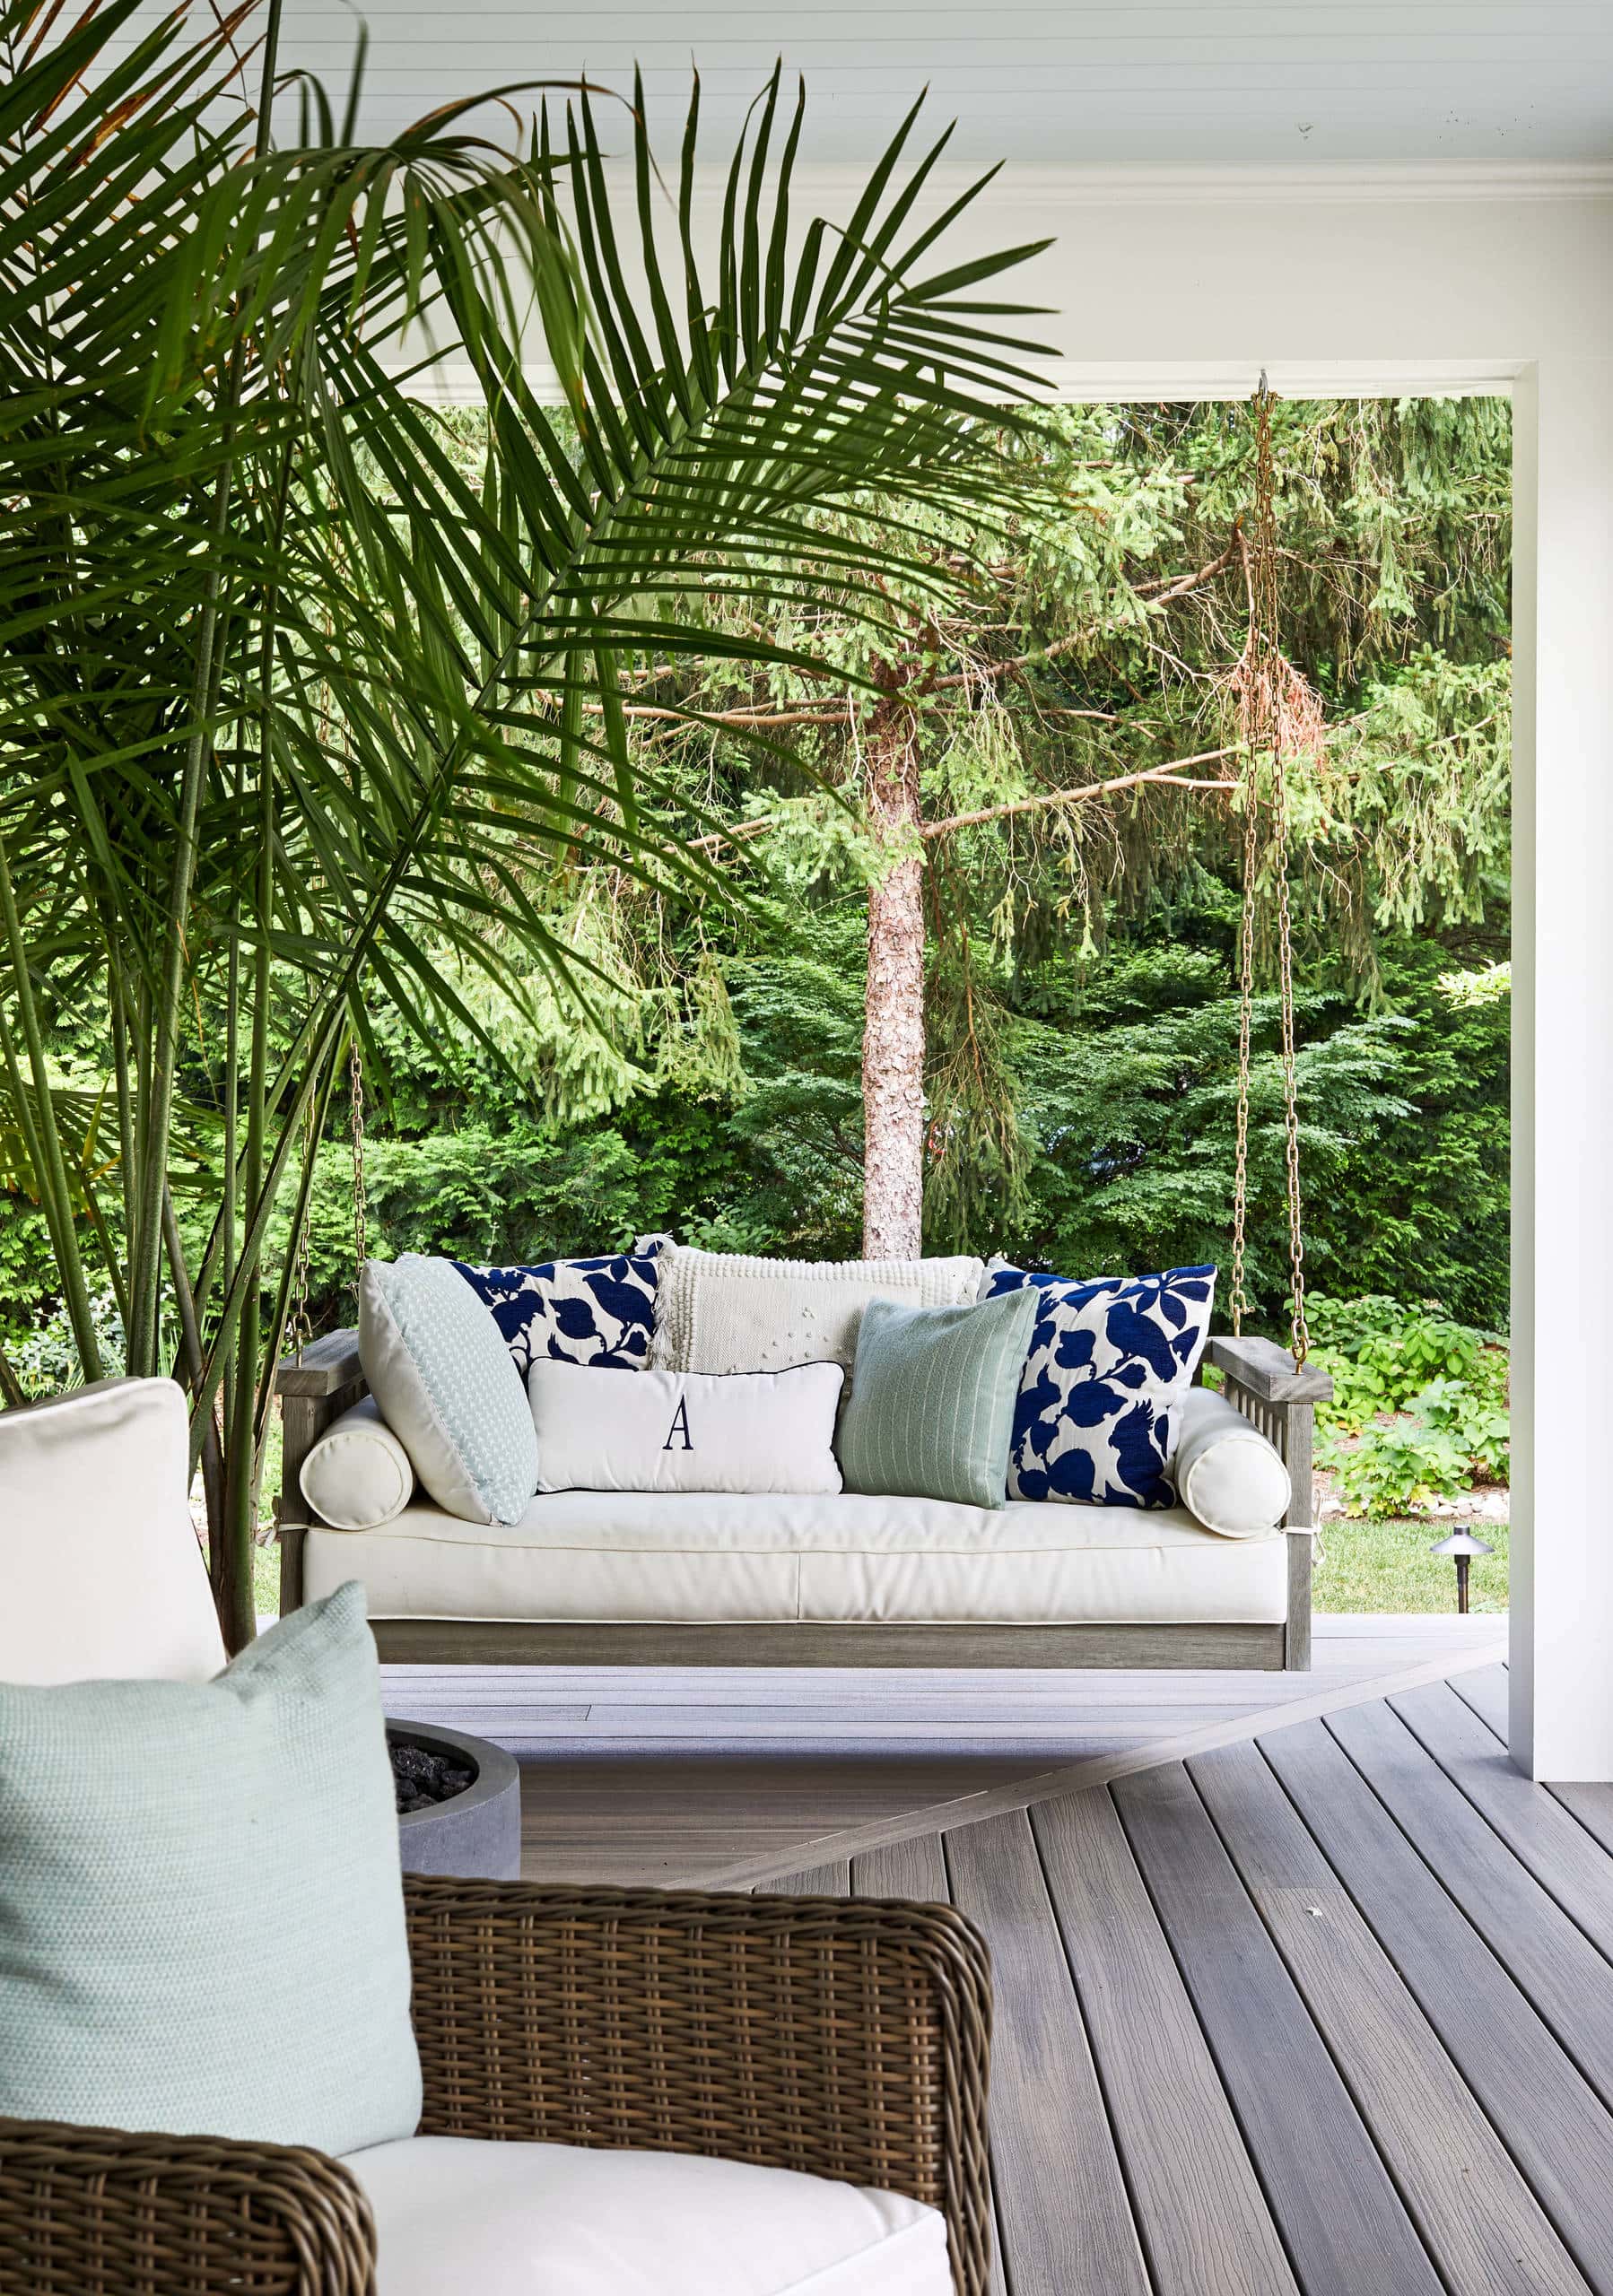 Gibson Island home tour featuring costal style interior decor